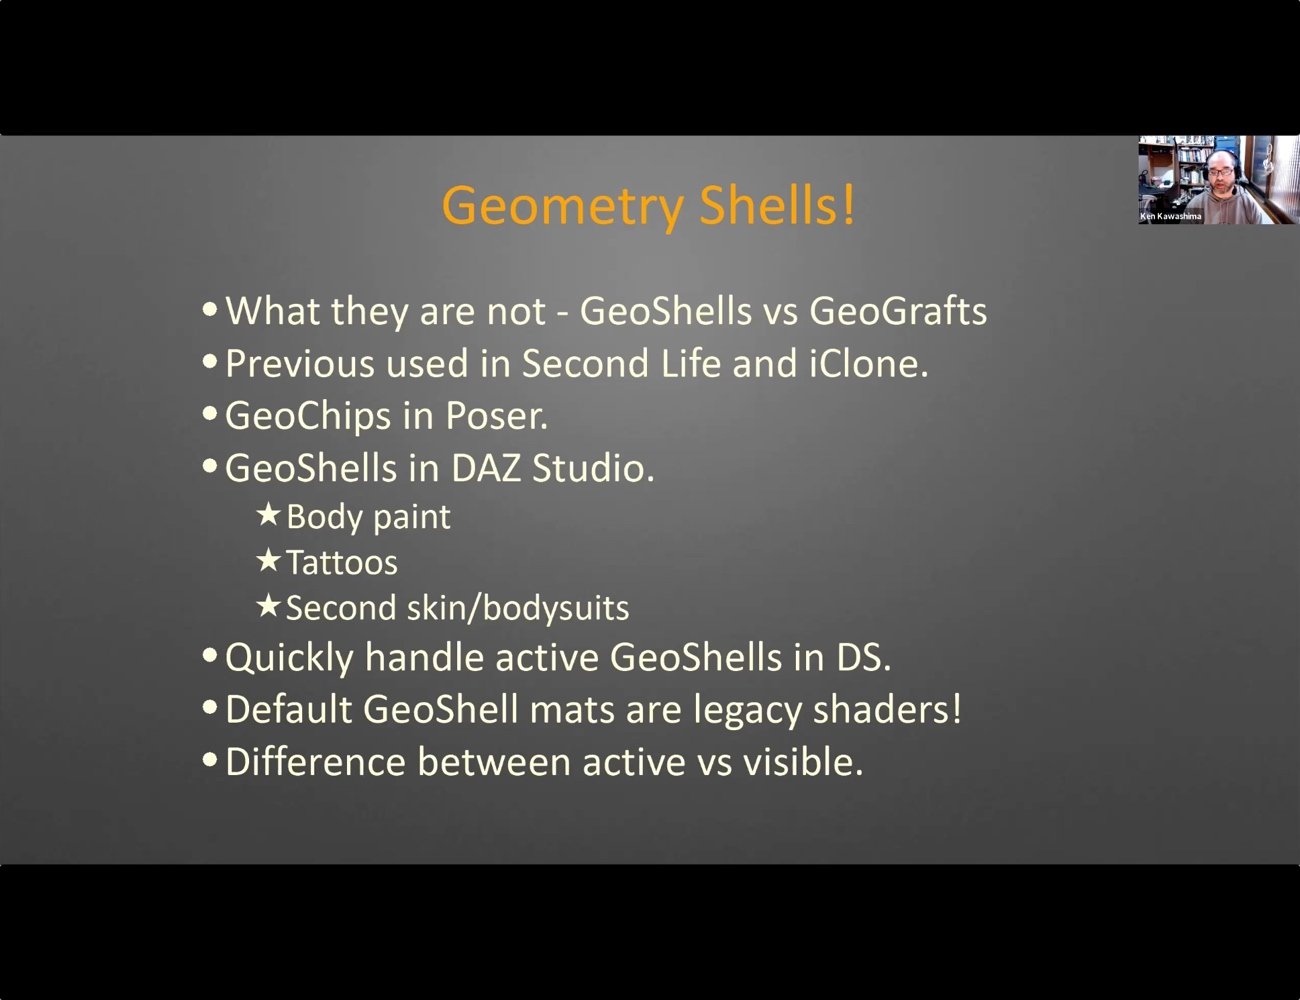 Second Skin : The Complete Guide to Geoshells by: Digital Art Live, 3D Models by Daz 3D